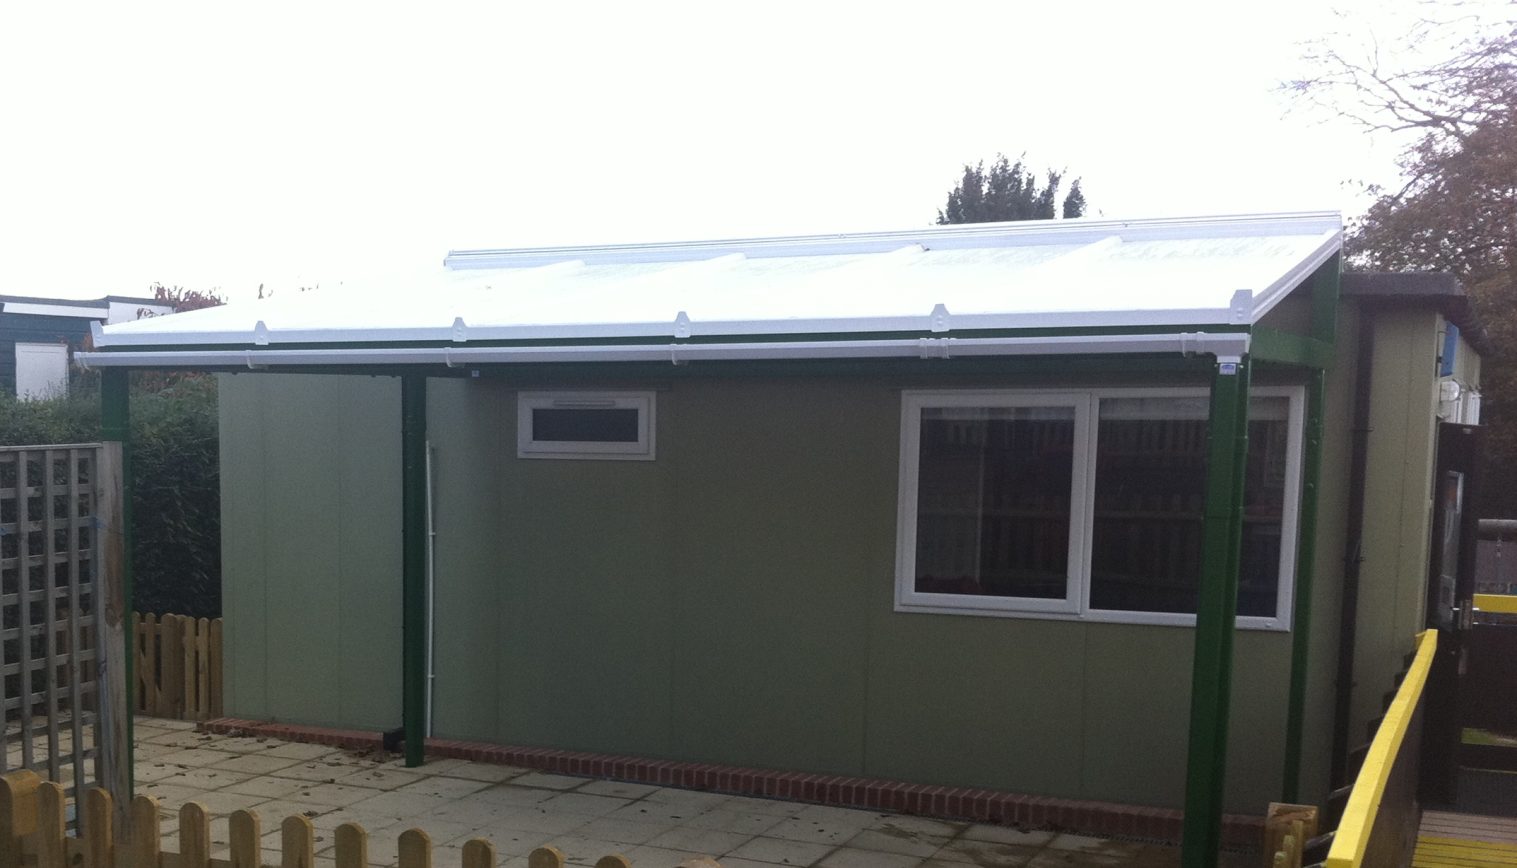 Mayfield C of E Primary School – Free Standing Canopy